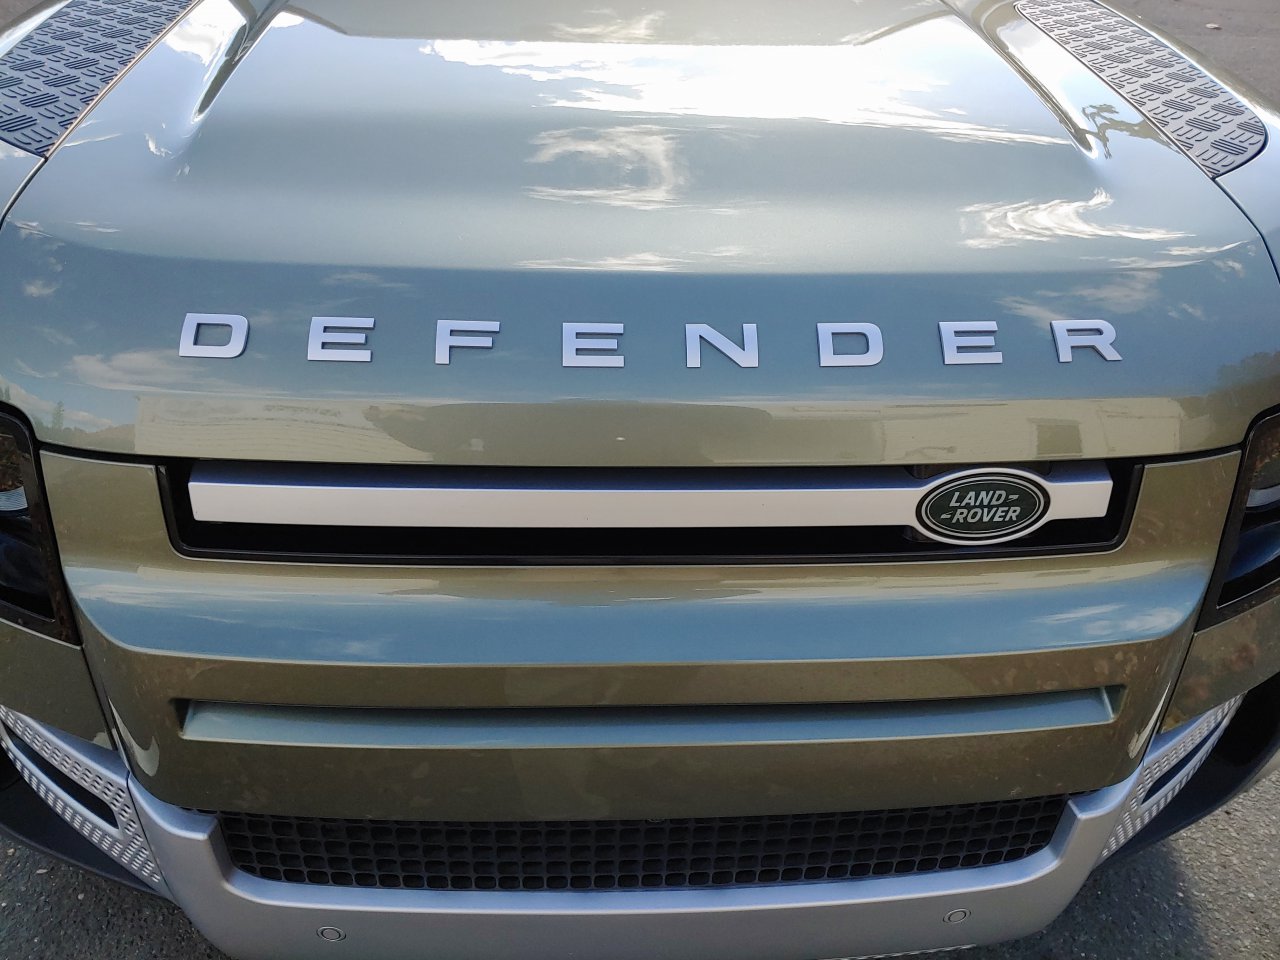 Defender, Defender 90 is the new champion among SUVs, ClassicCars.com Journal